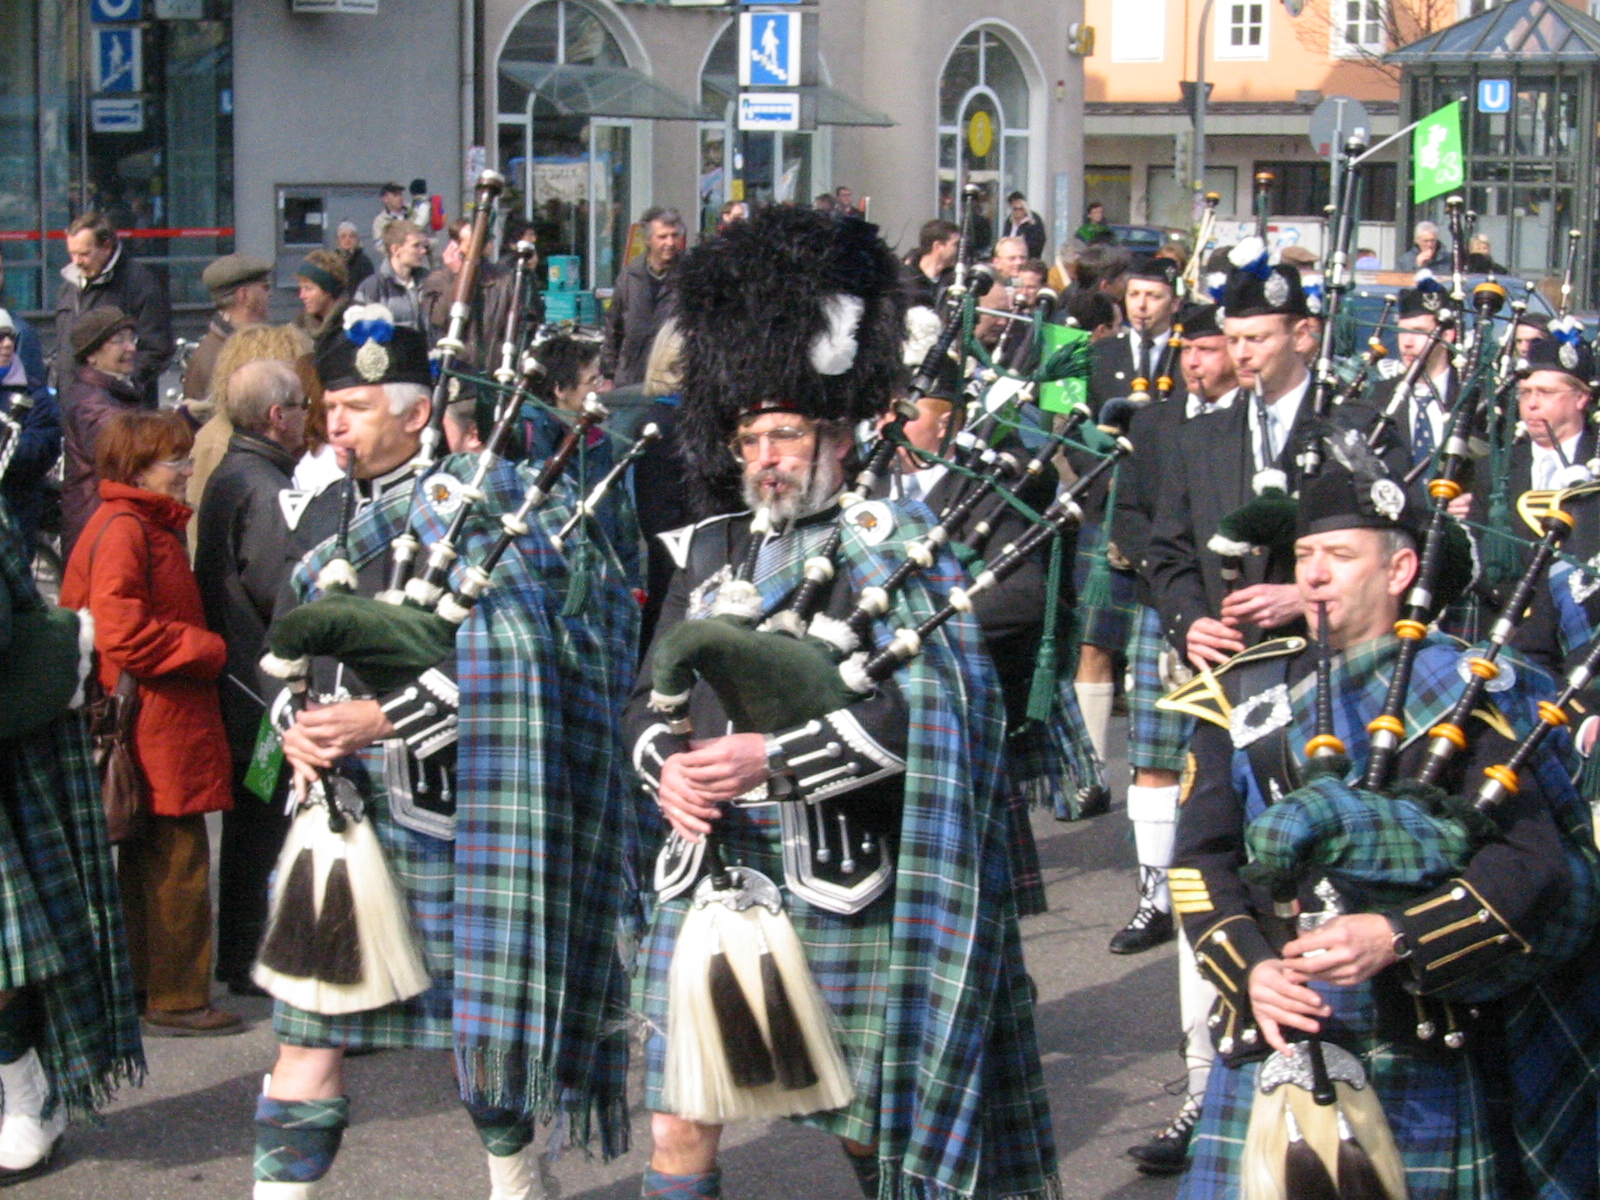 people in kilts on the street playing instruments